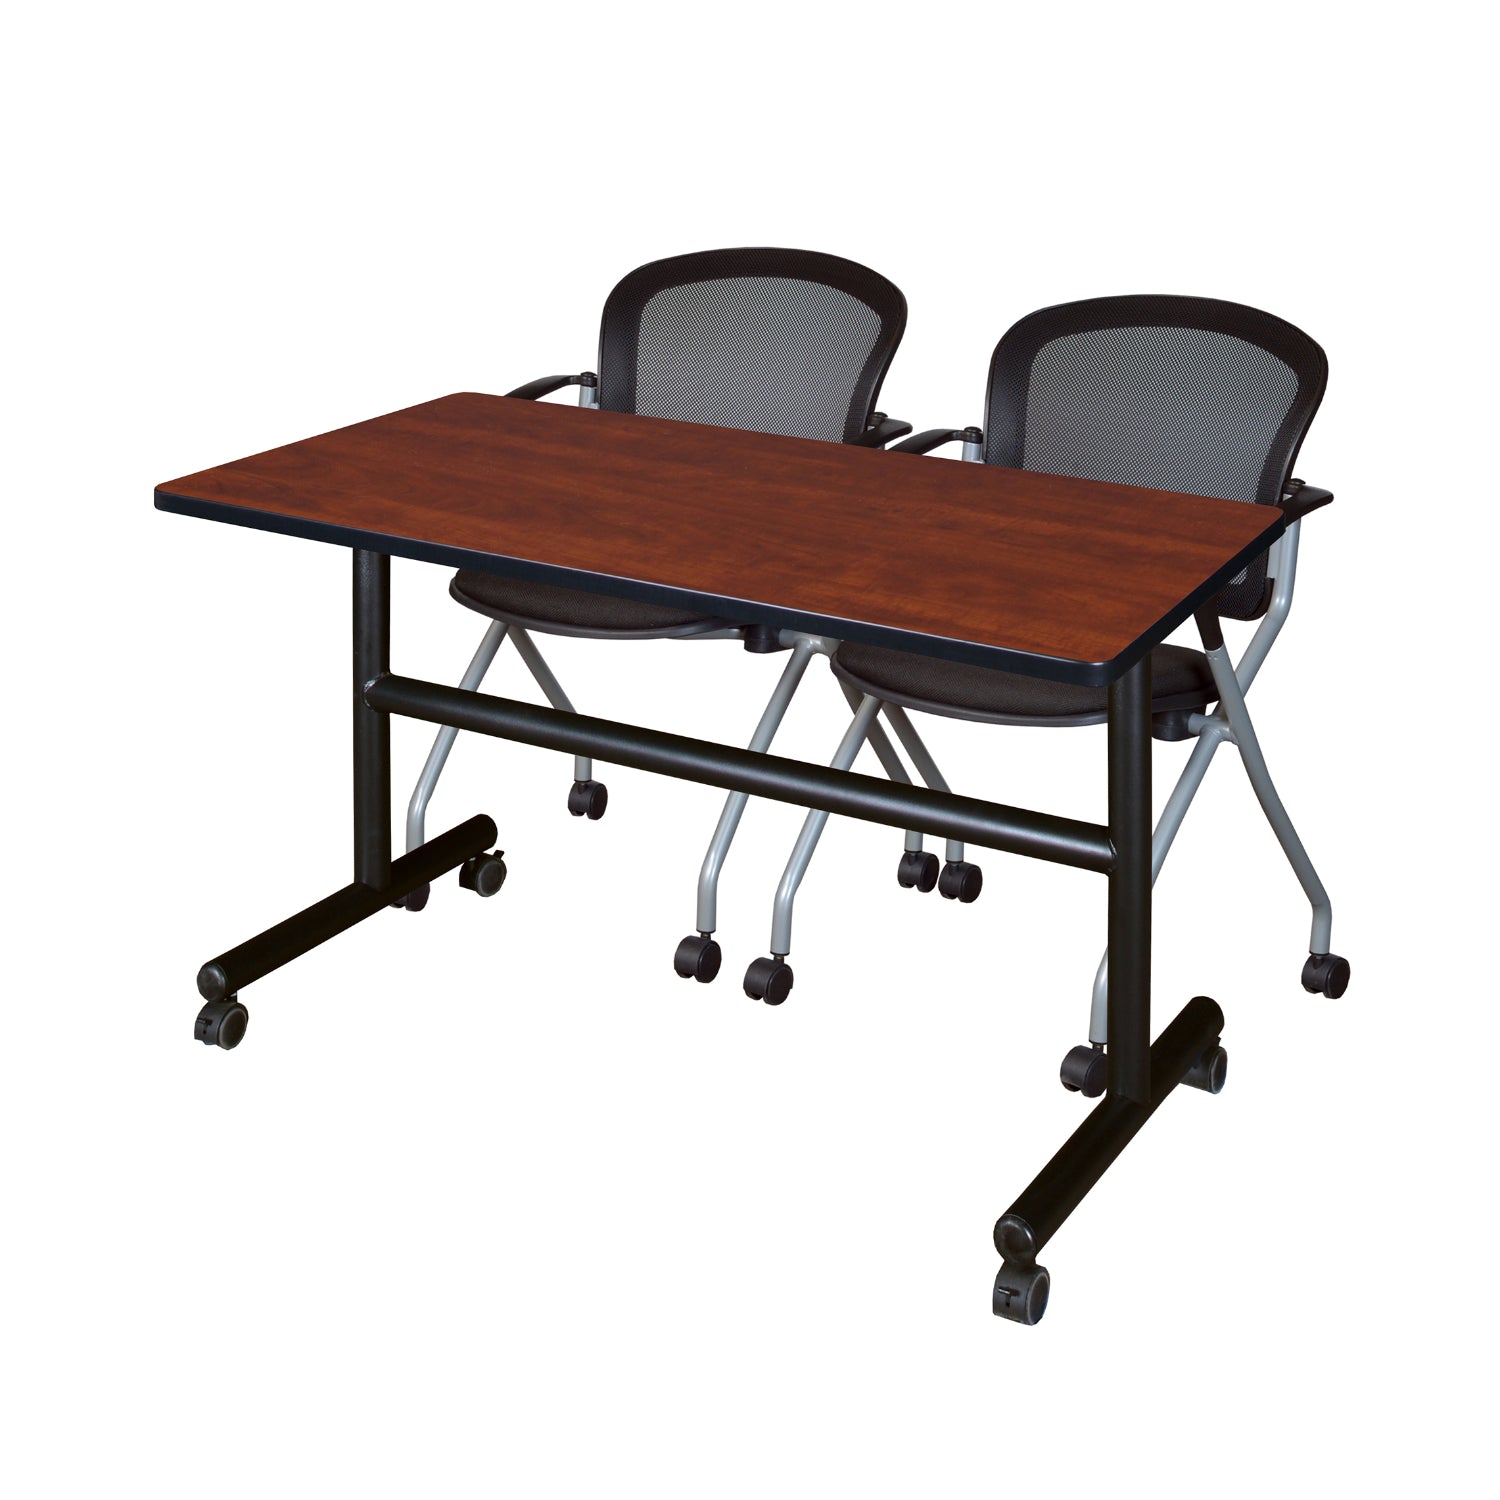 Kobe Flip Top Training Table and Chair Package, Kobe 48" x 30" Flip Top Mobile Nesting Table with 2 Cadence Nesting Chairs